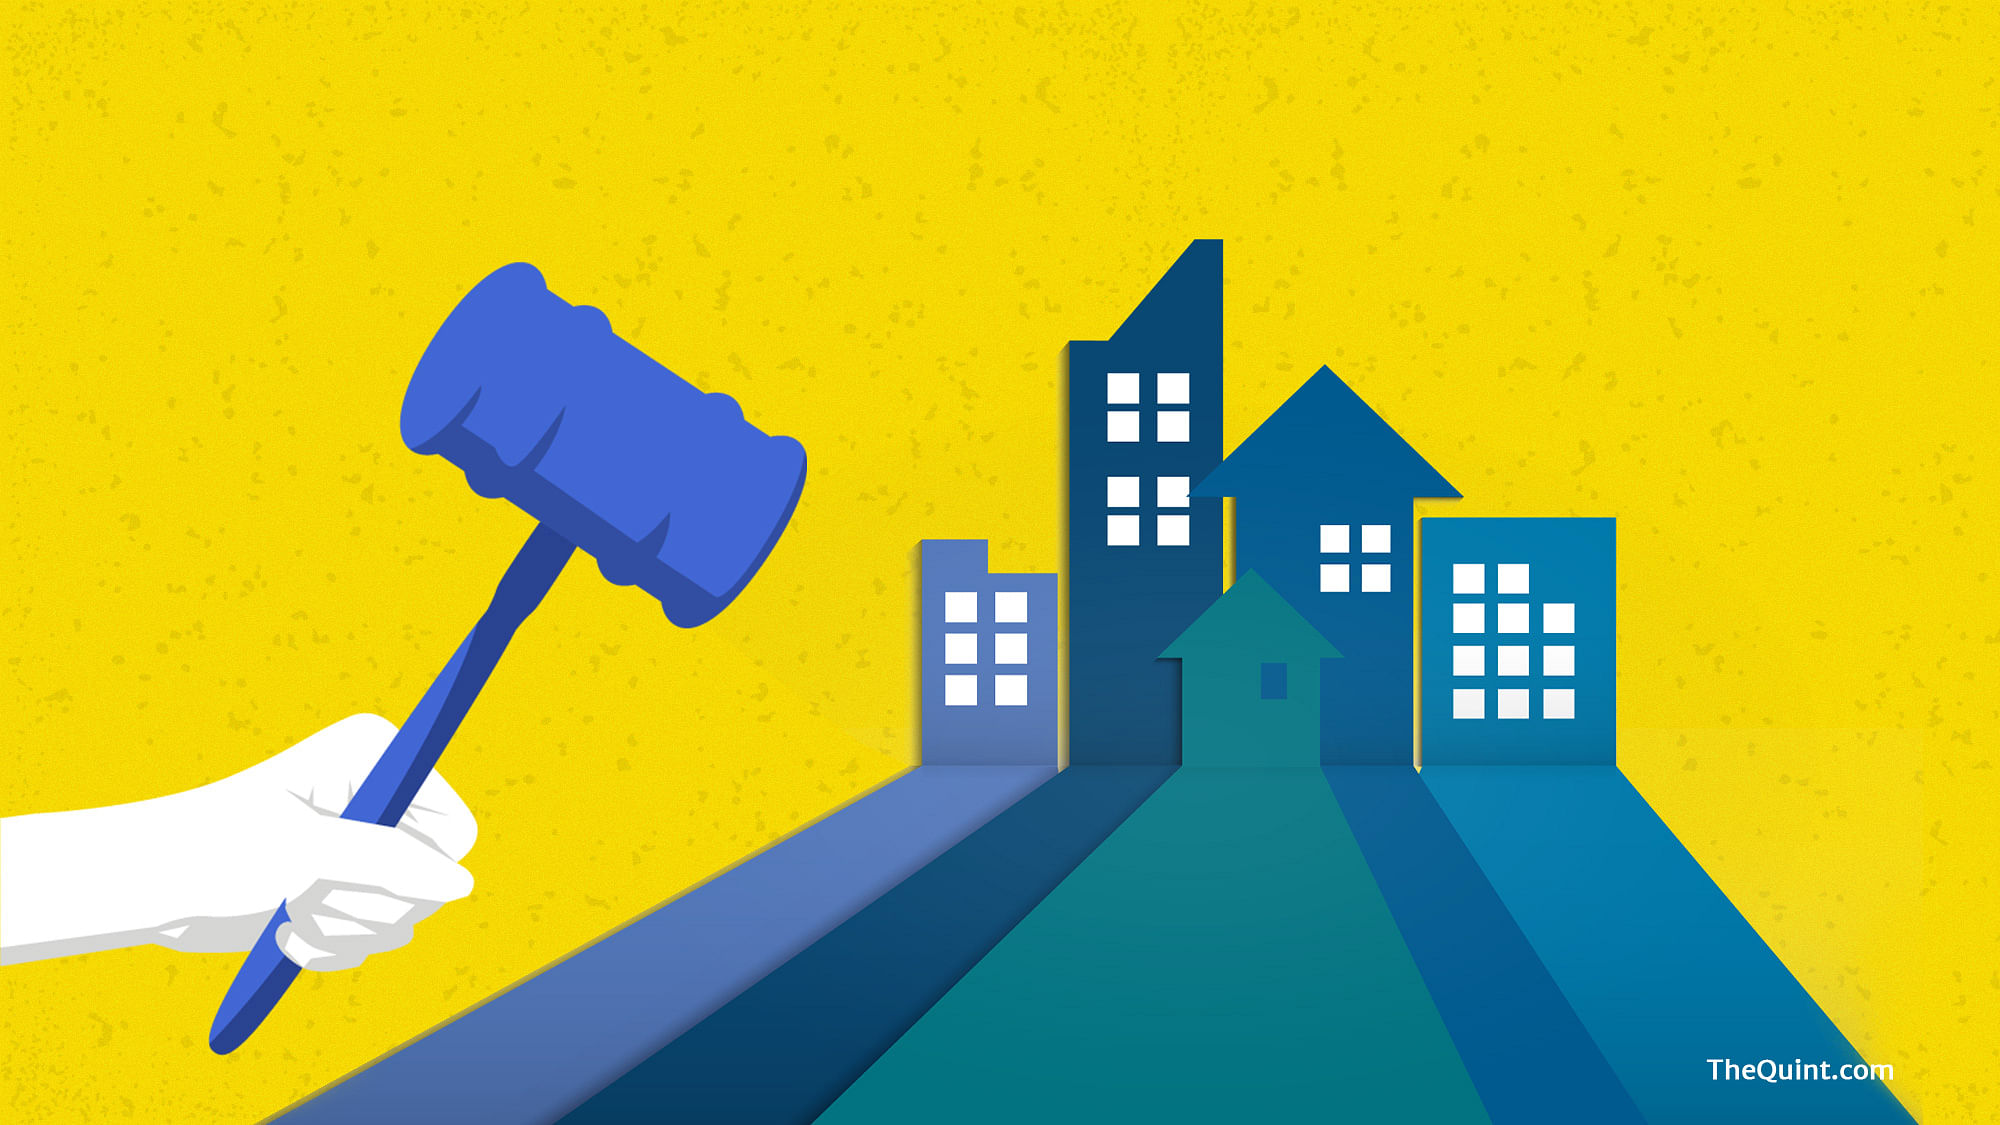 It’s been barely 6 months of implementation and India’s real estate law is already facing an existential challenge.